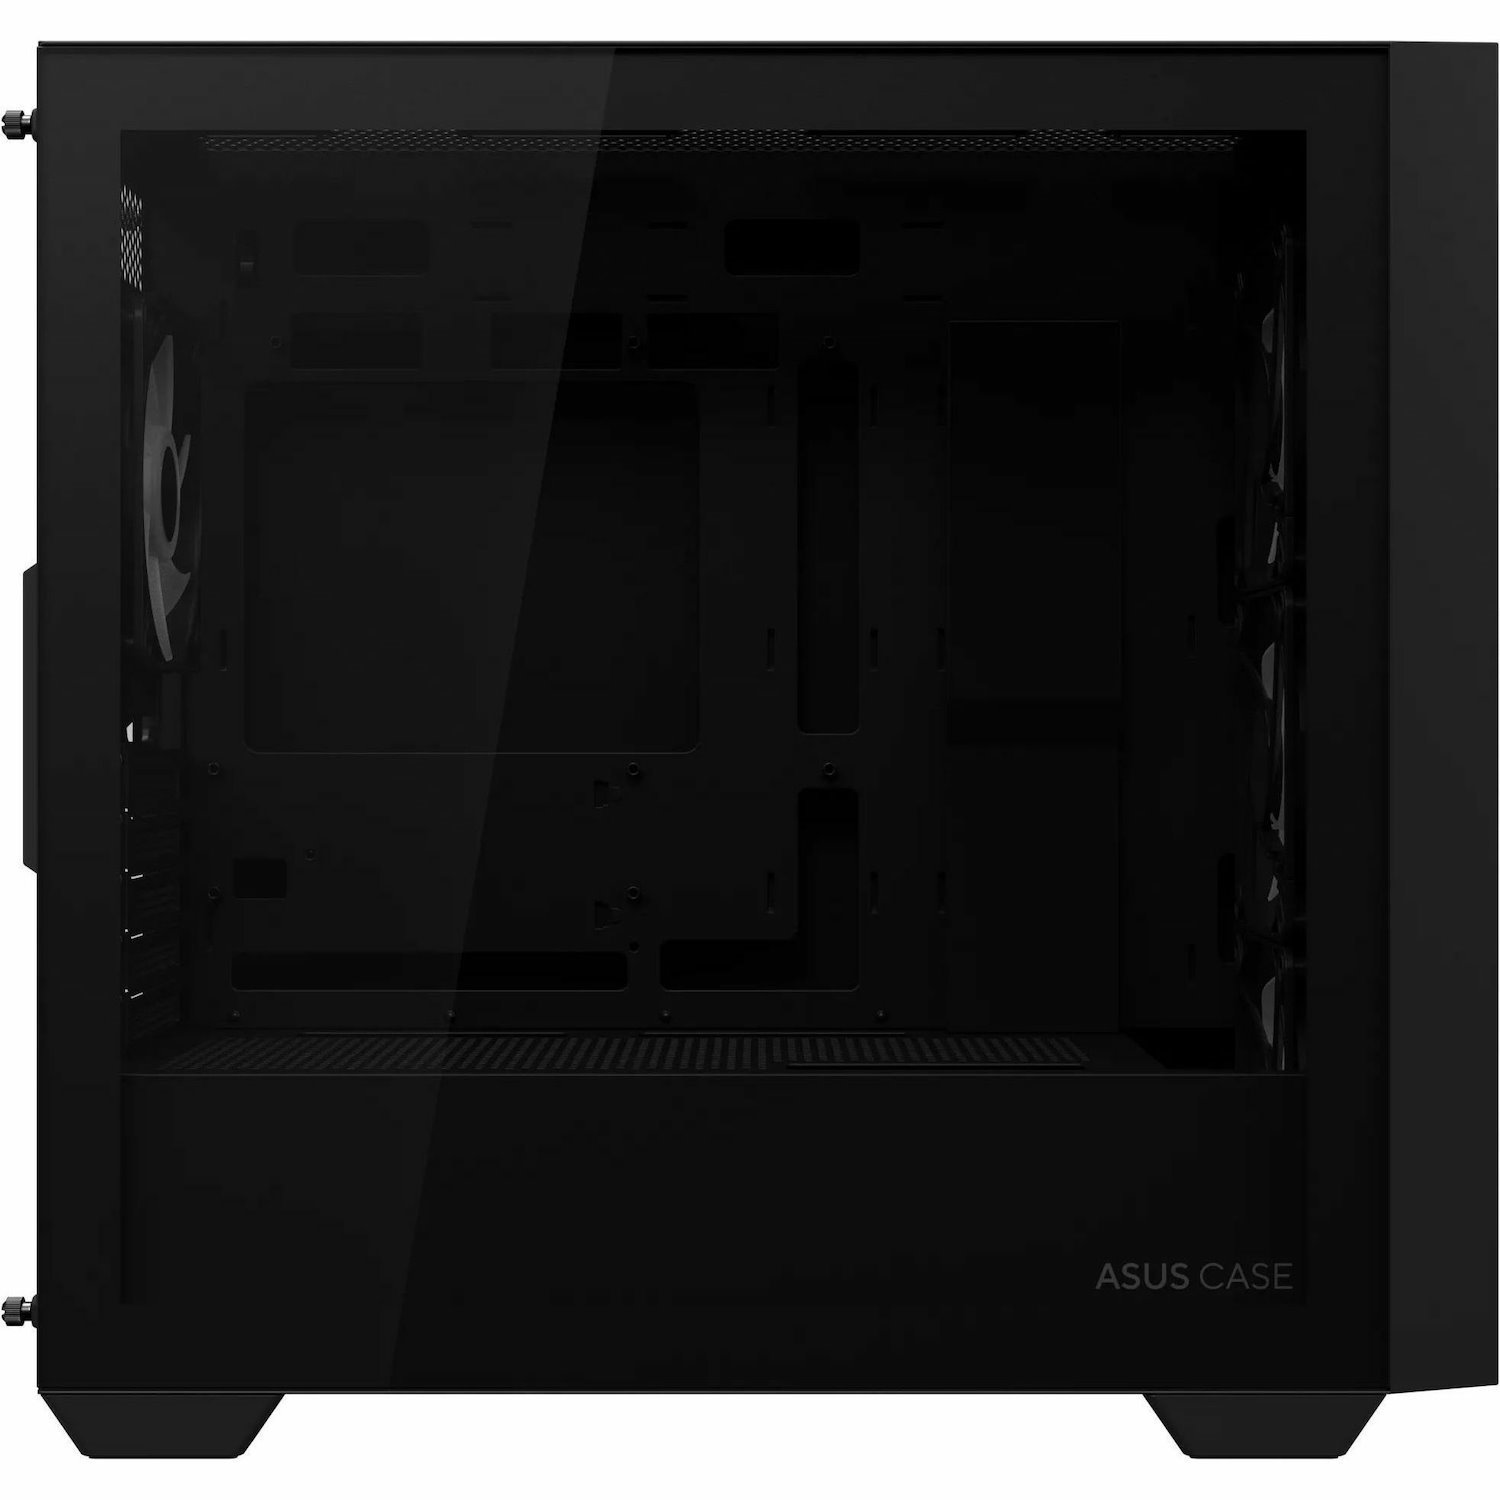 Asus ASUS A21 PLUS Case Computer Case - Mini ITX, Micro ATX Motherboard Supported - Mid-tower - Mesh - Black